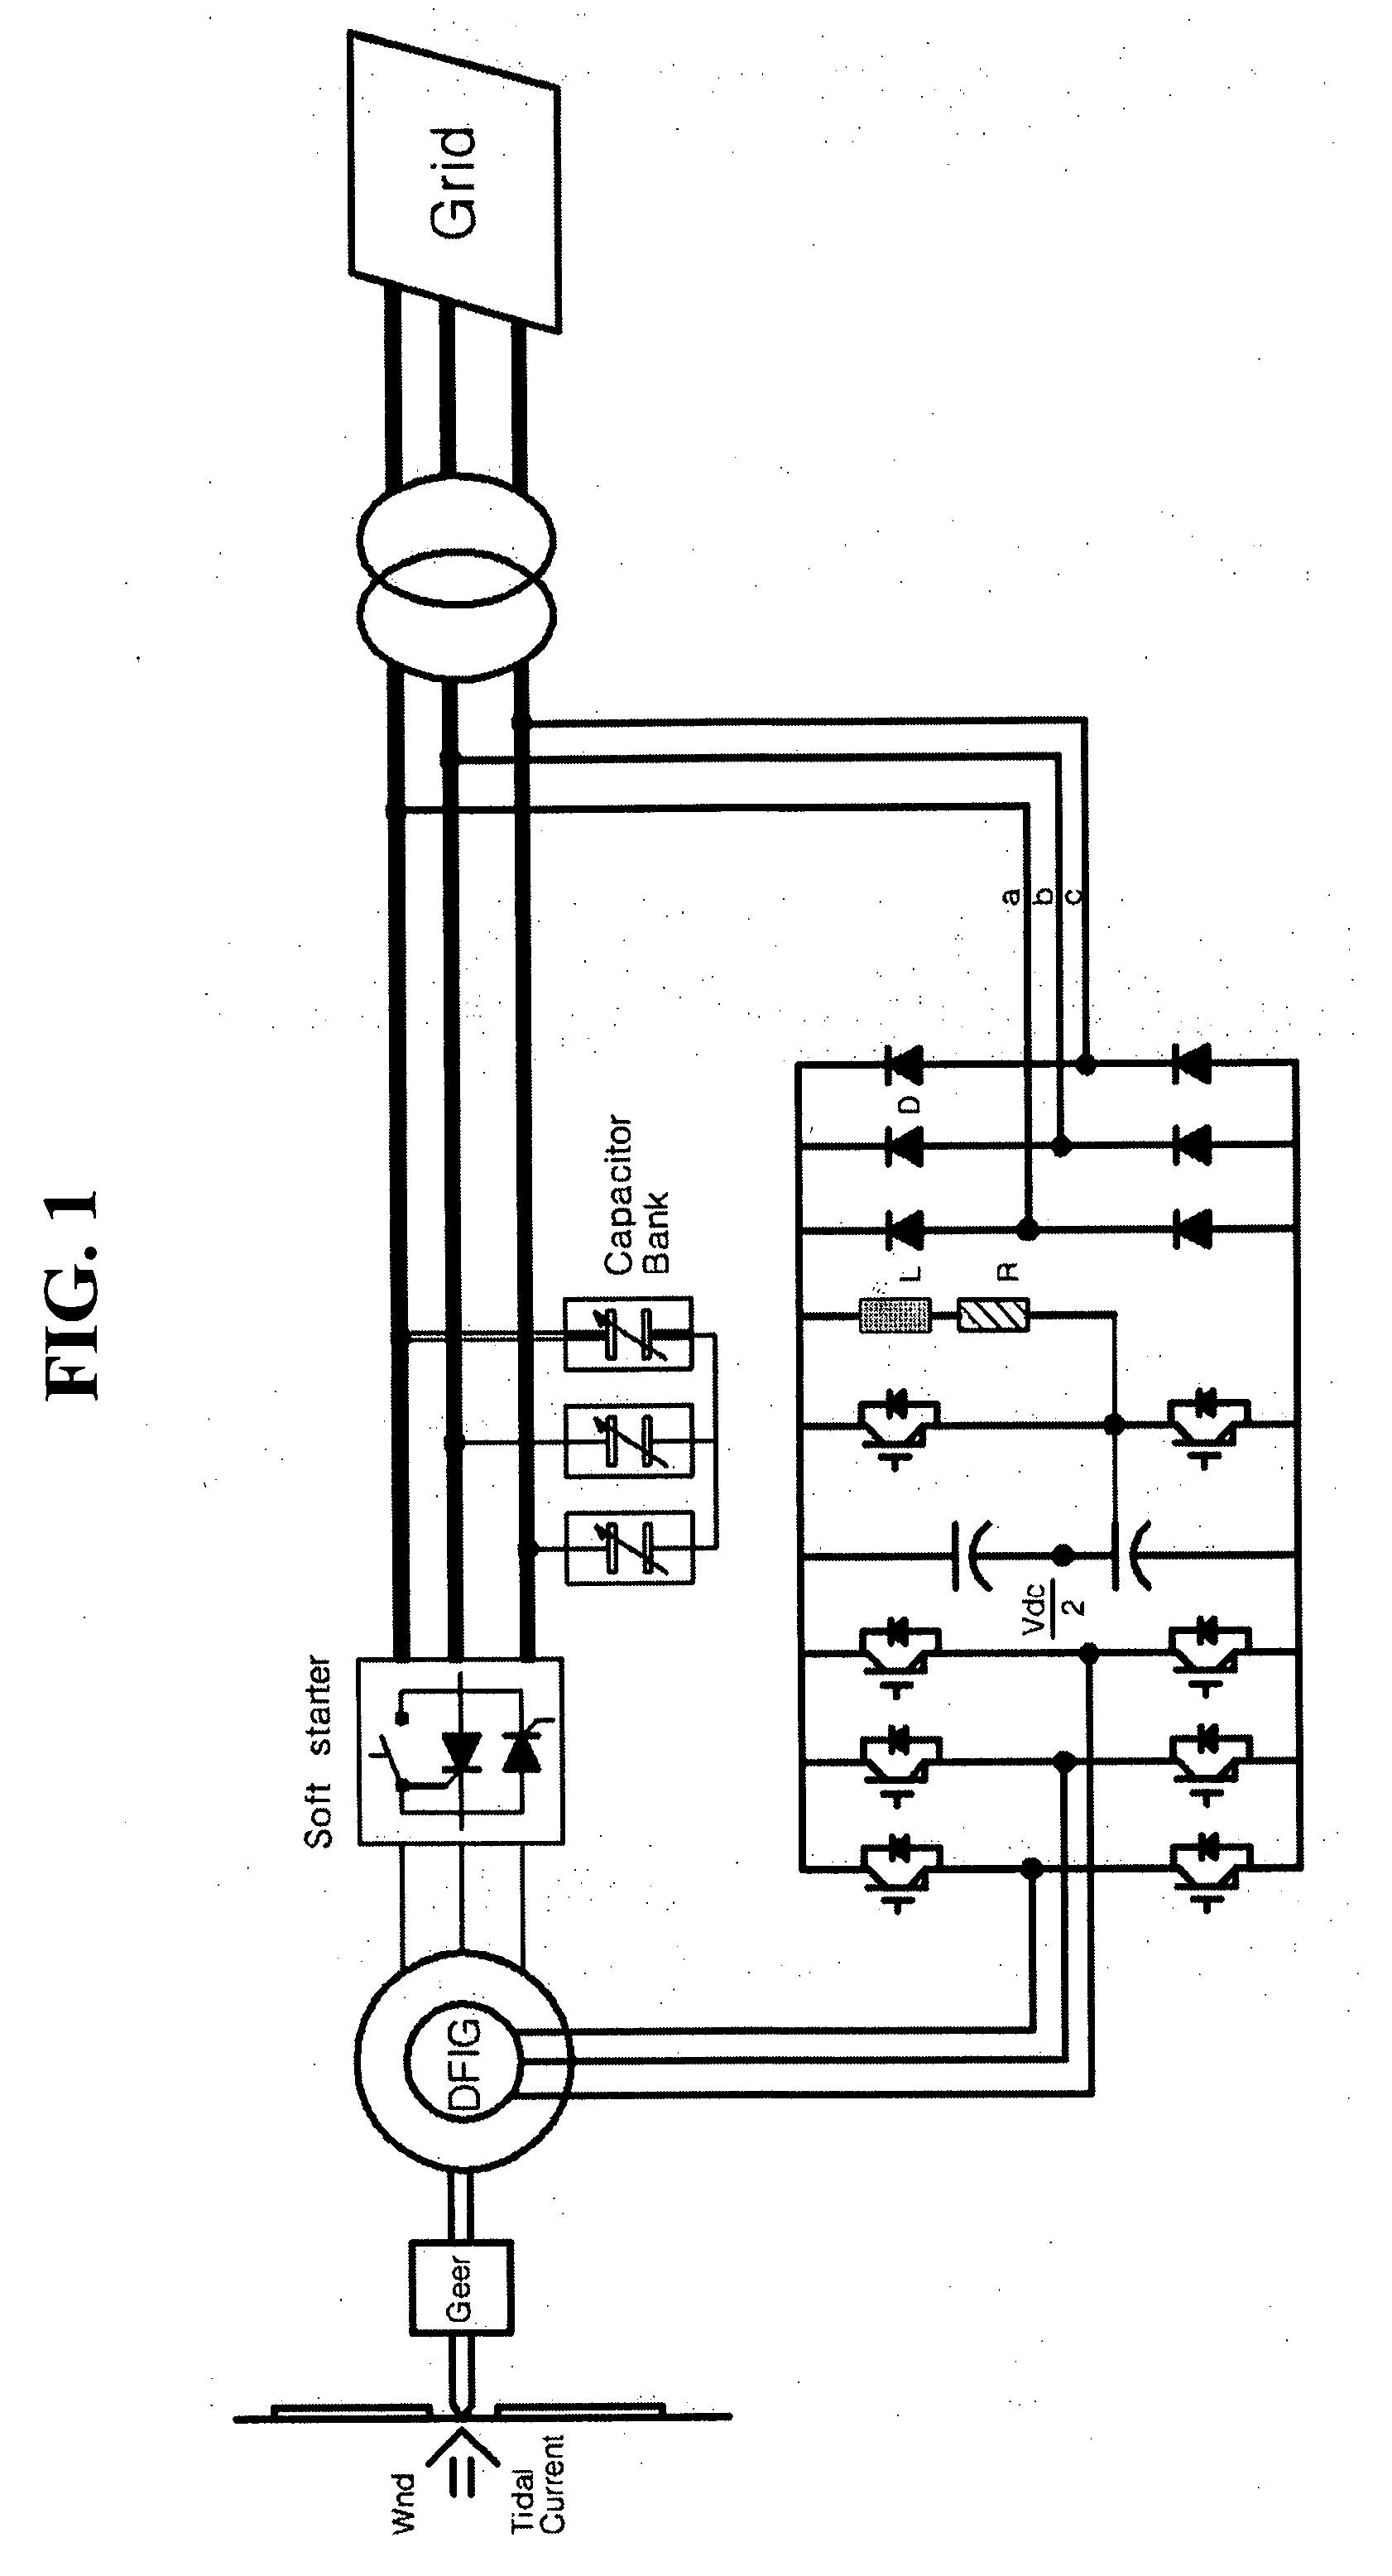 Controller of doubly-fed induction generator